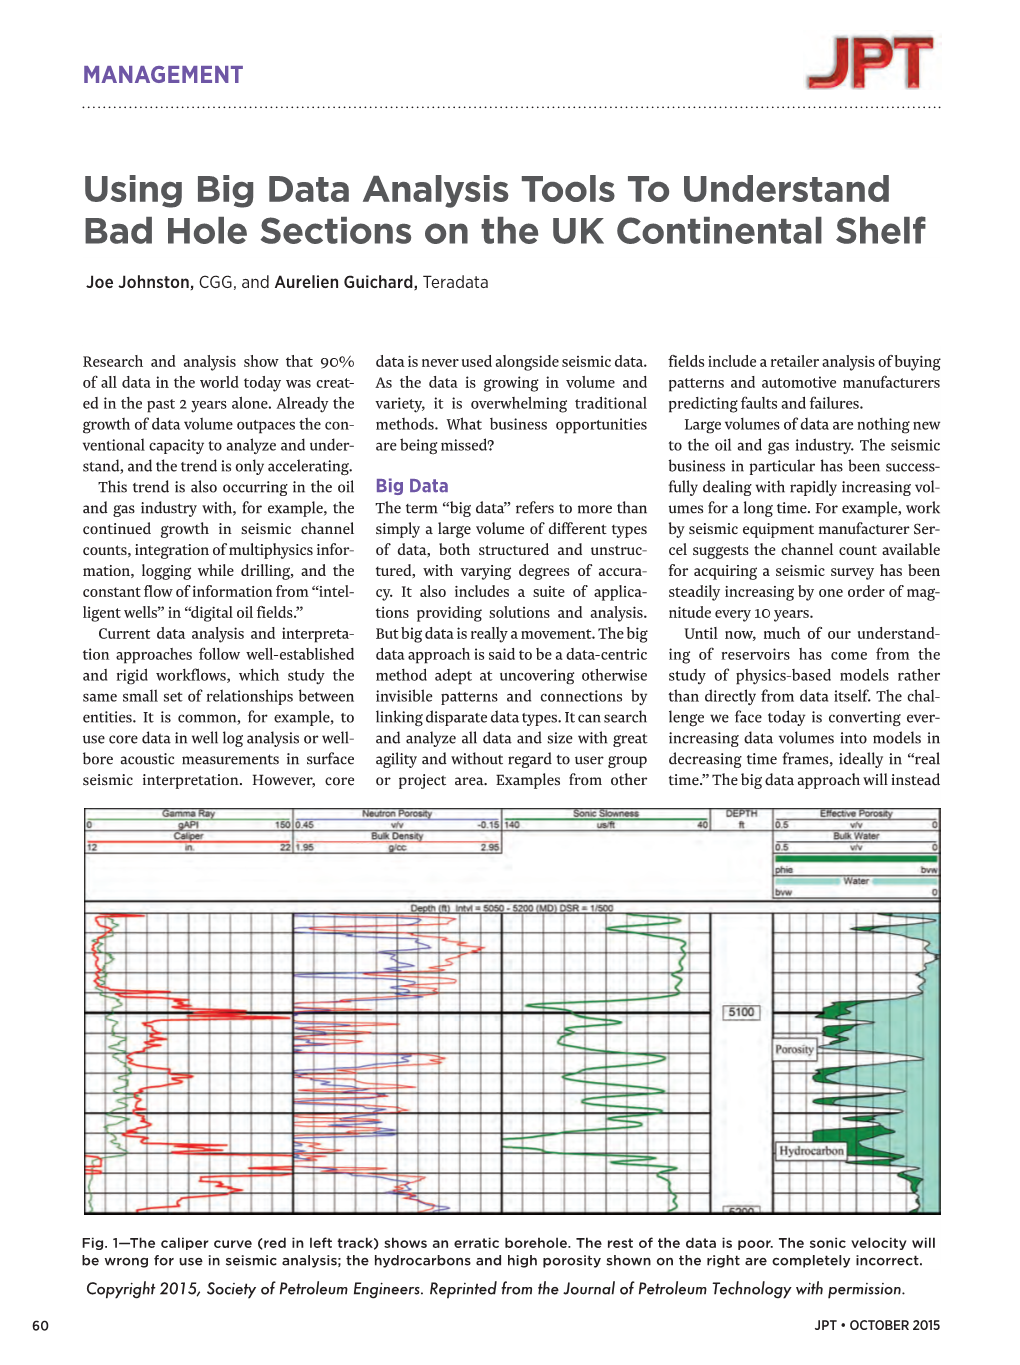 Using Big Data Analysis Tools to Understand Bad Hole Sections on the UK Continental Shelf